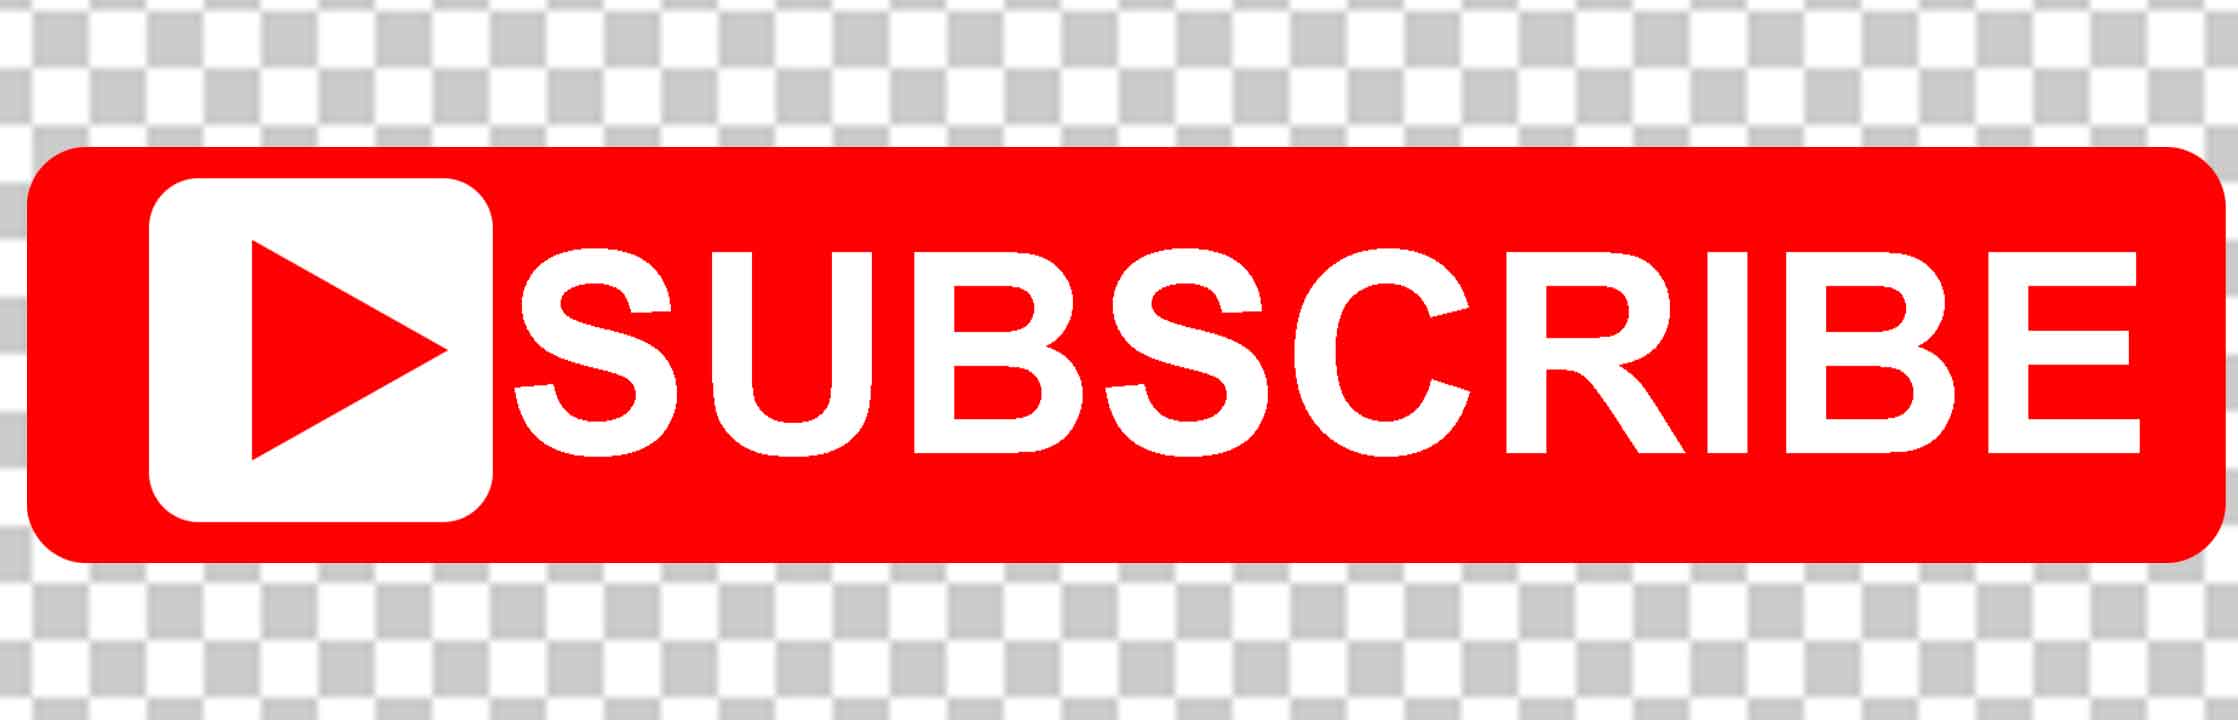 YouTube Subscribe Button Png Photo Free Download